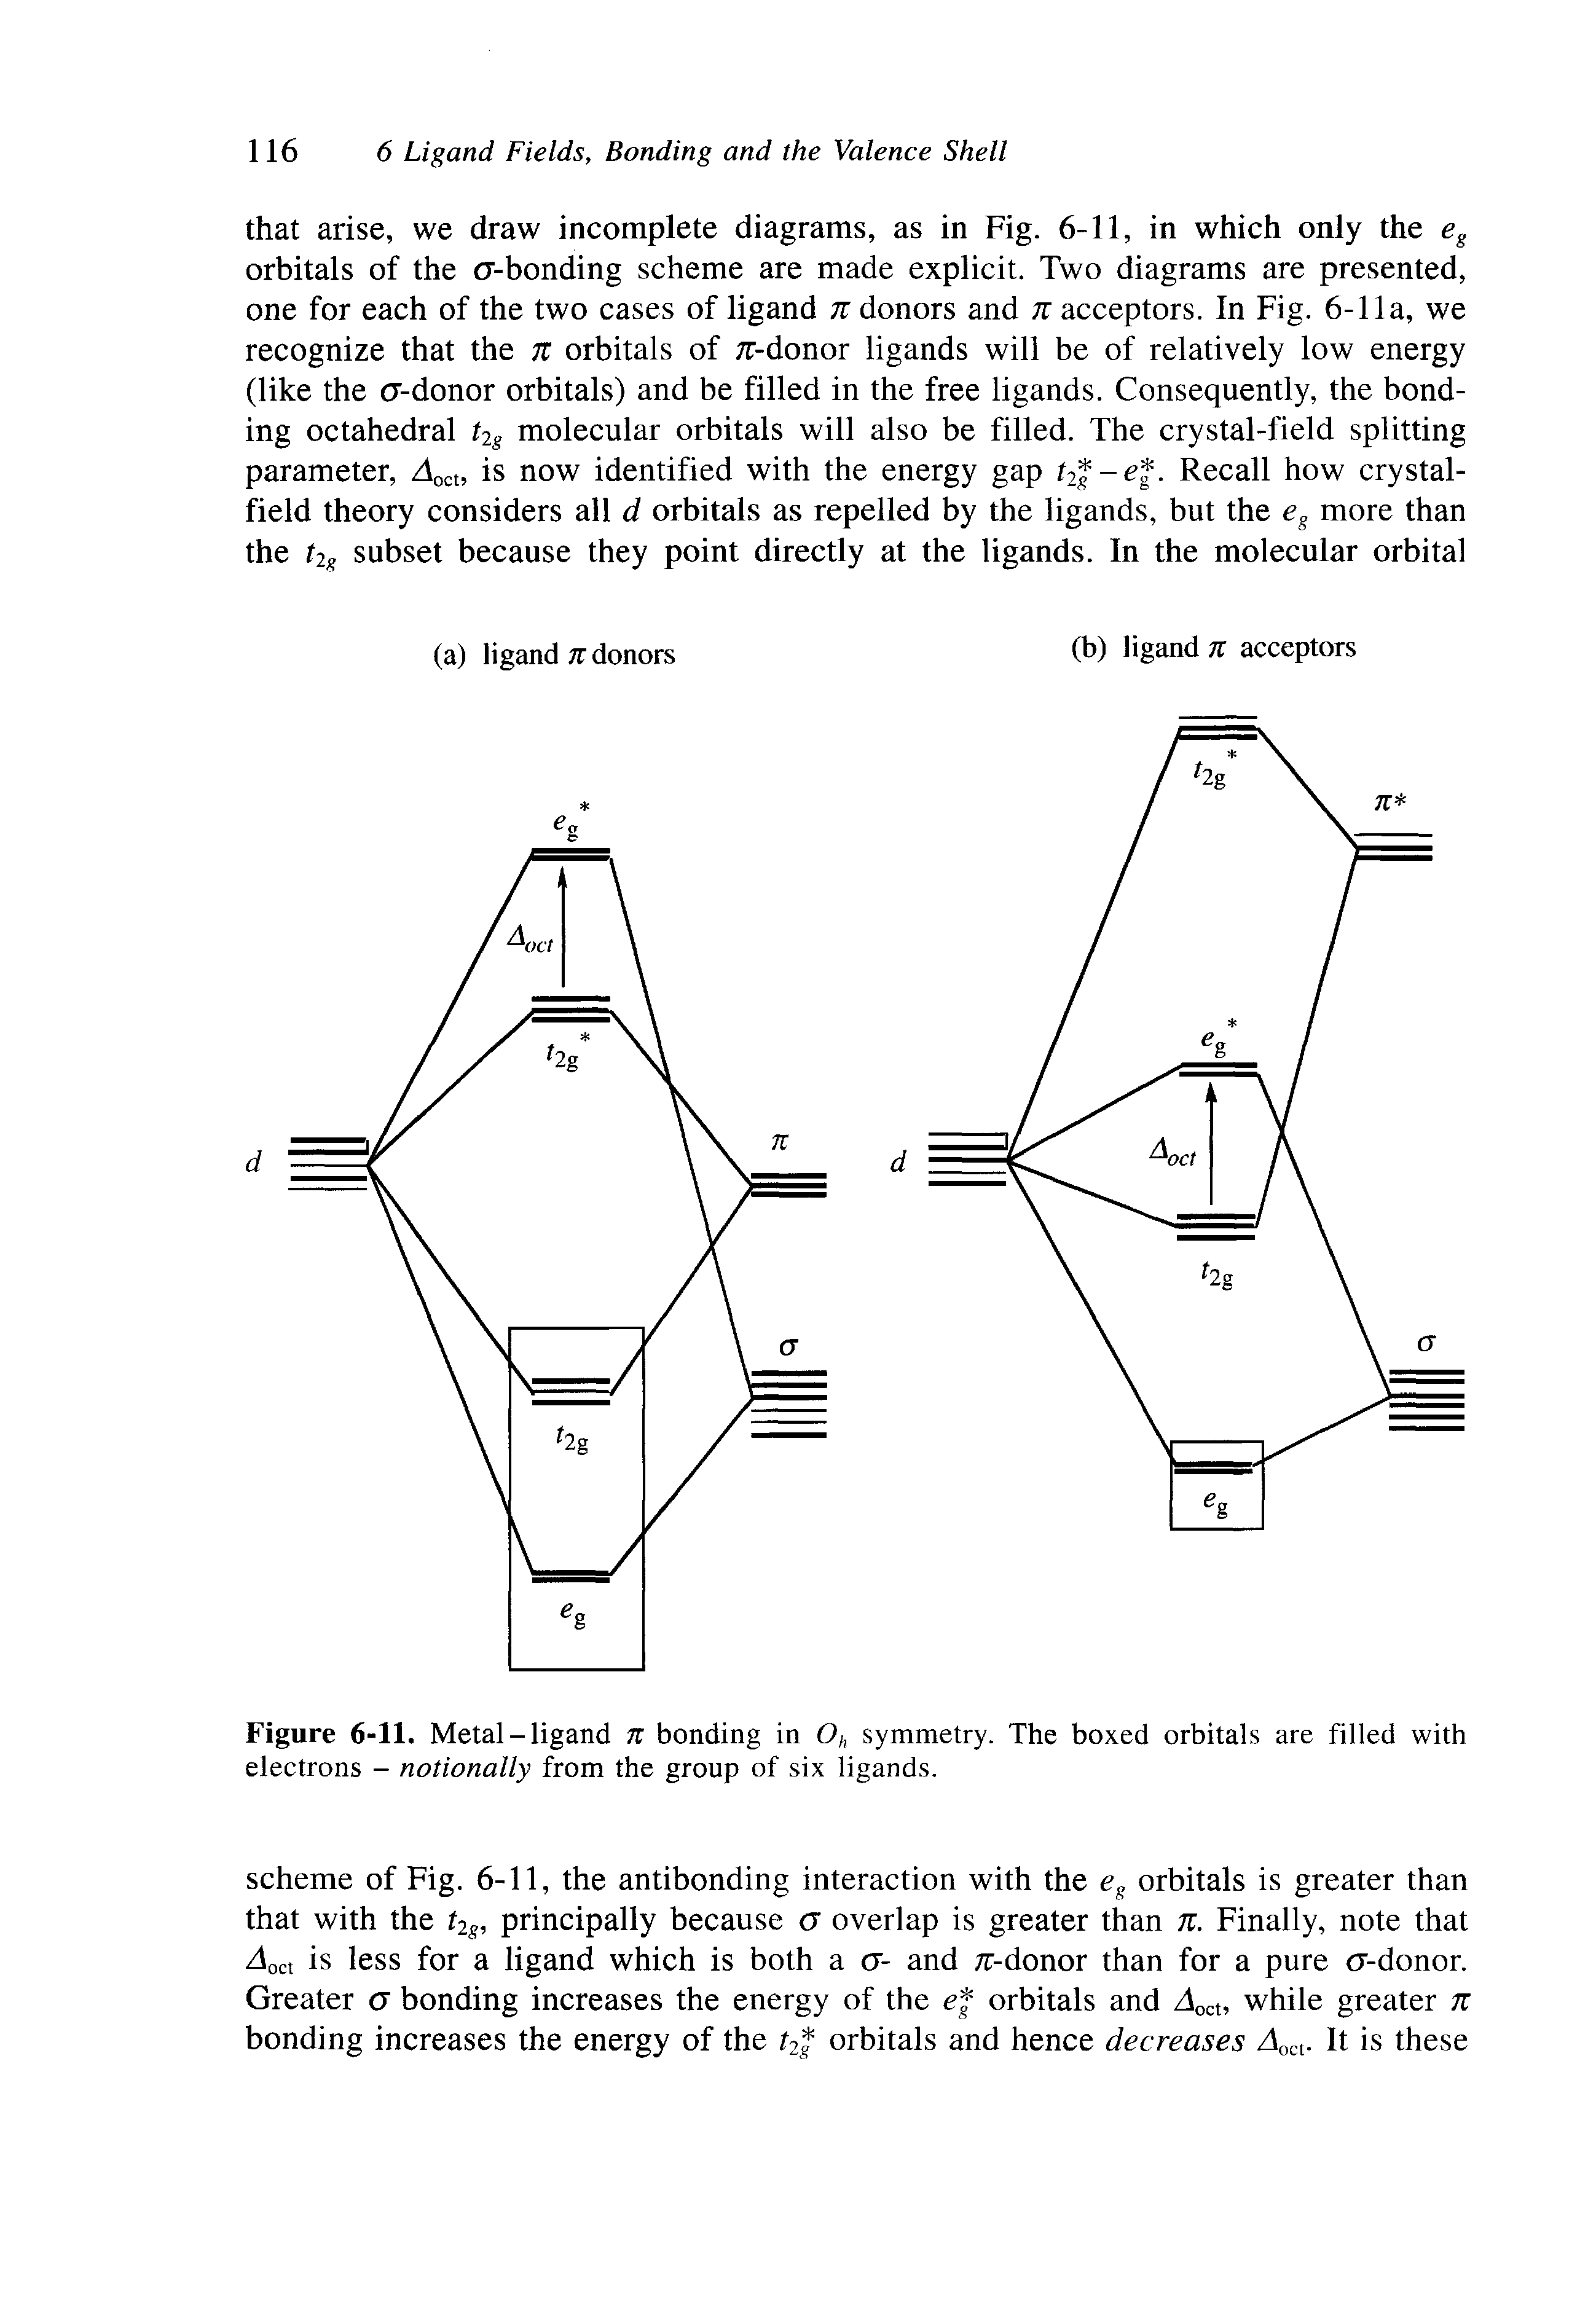 Figure 6-11. Metal - ligand n bonding in symmetry. The boxed orbitals are filled with electrons - nationally from the group of six ligands.